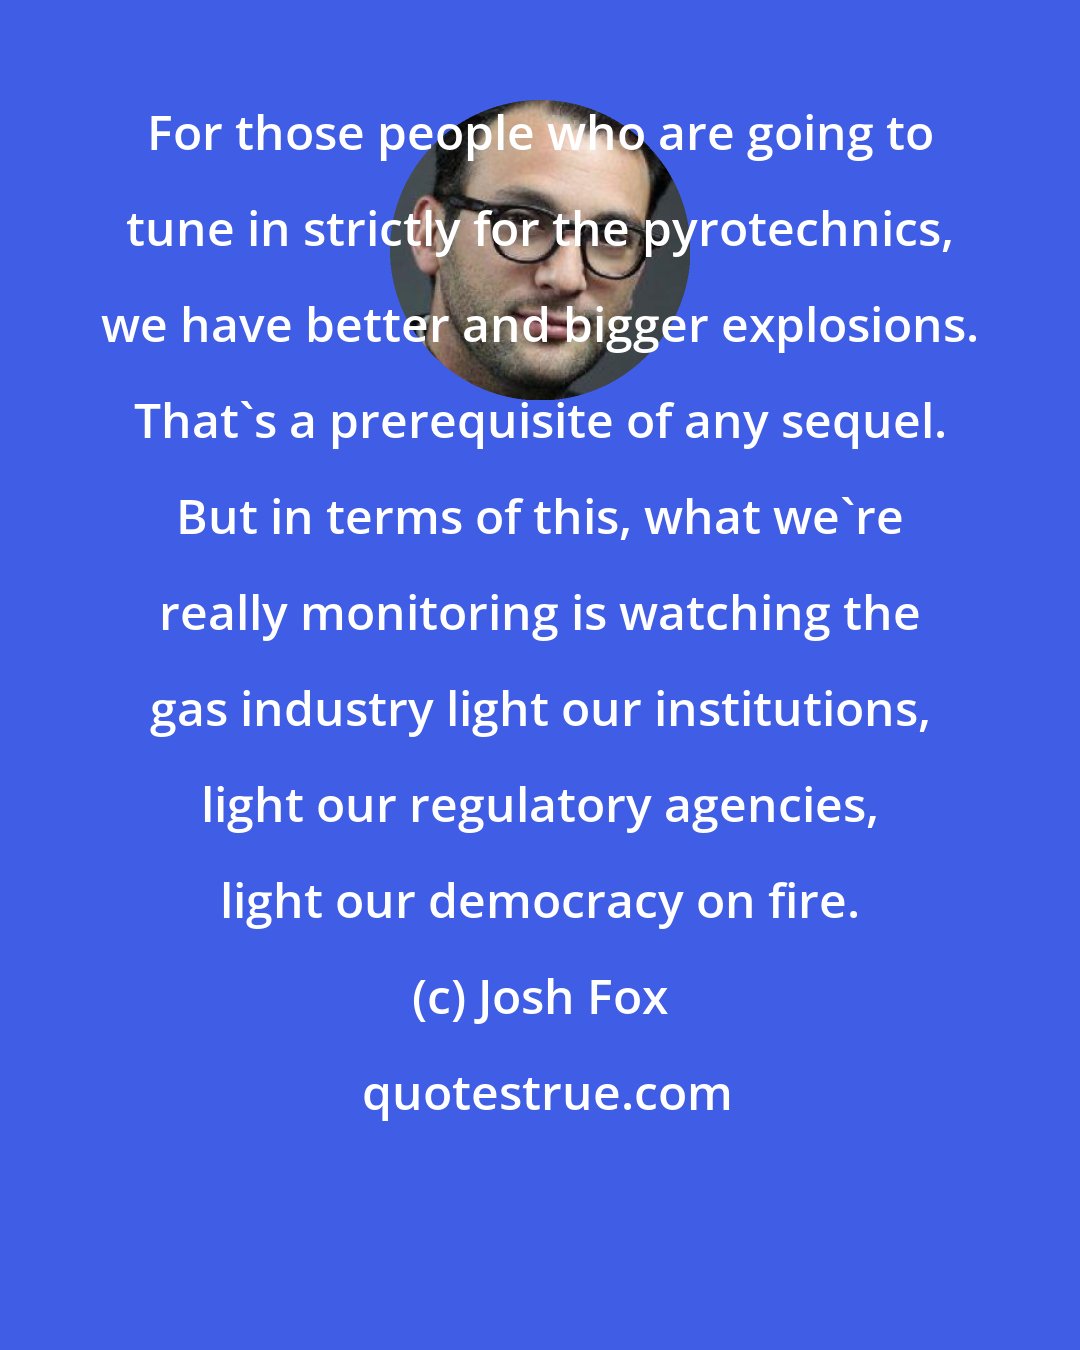 Josh Fox: For those people who are going to tune in strictly for the pyrotechnics, we have better and bigger explosions. That's a prerequisite of any sequel. But in terms of this, what we're really monitoring is watching the gas industry light our institutions, light our regulatory agencies, light our democracy on fire.